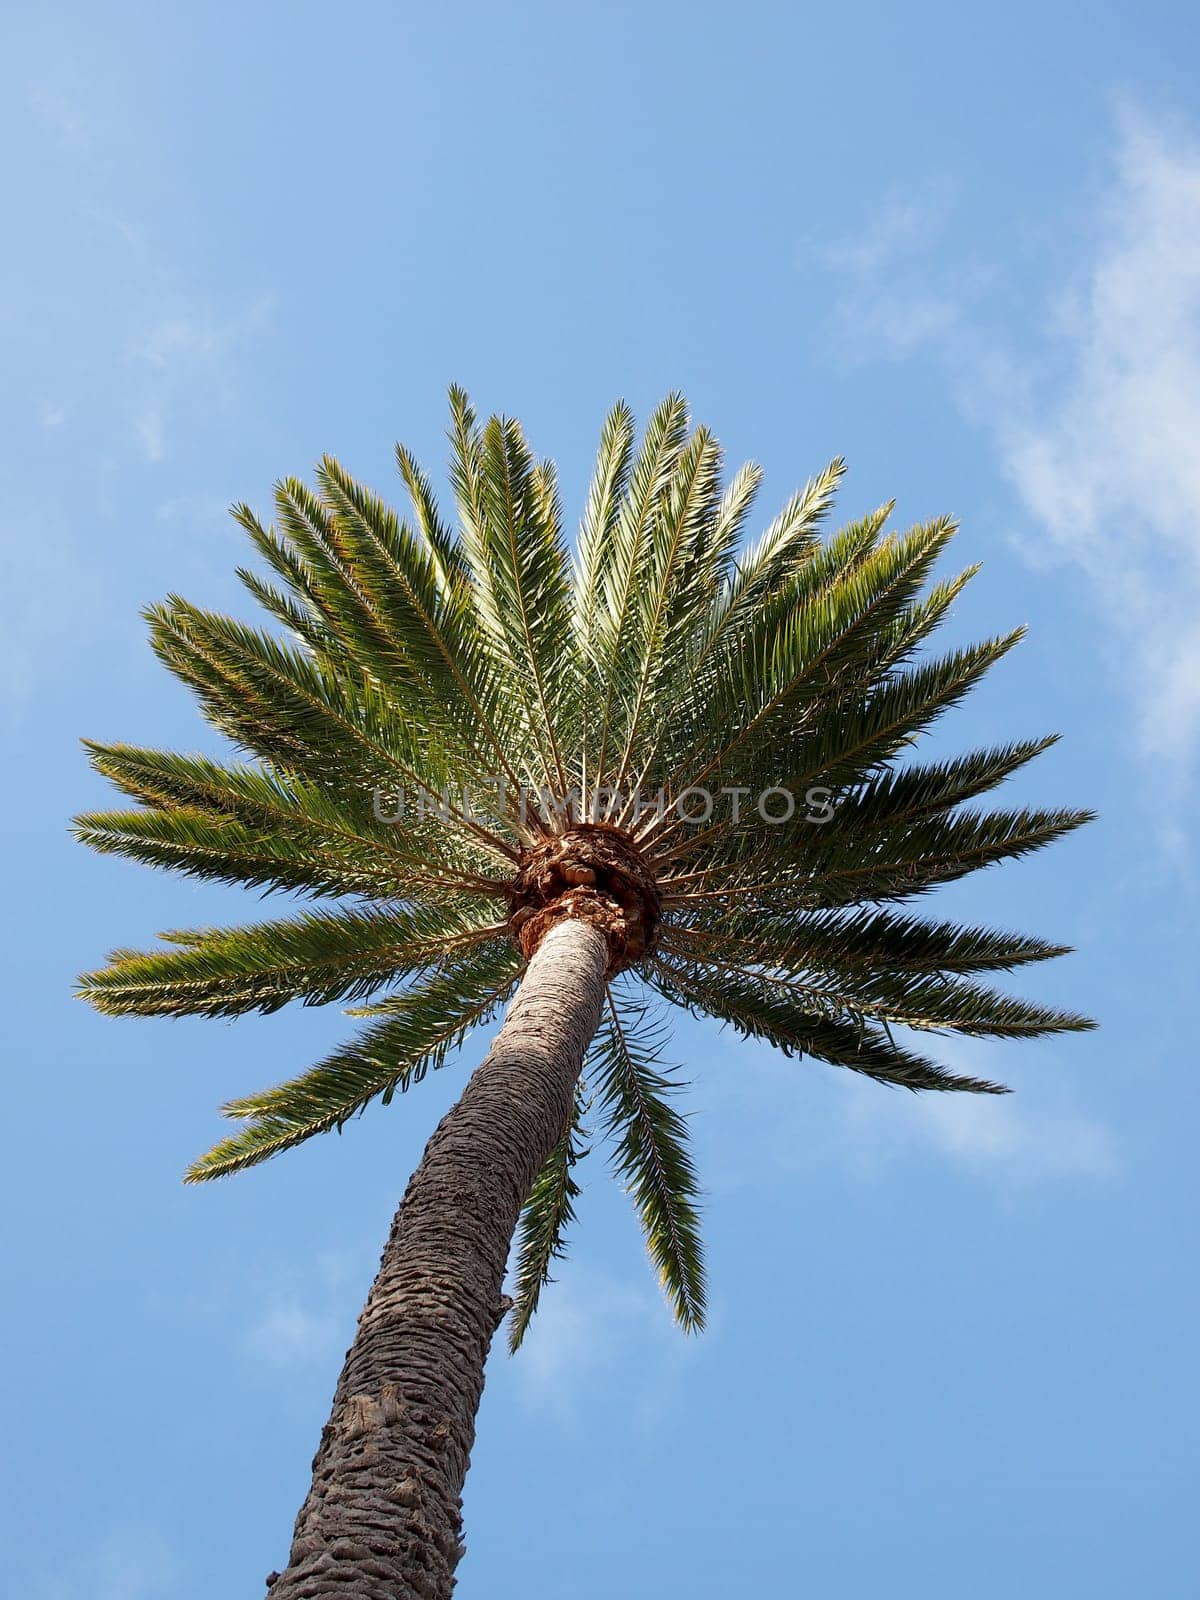 Palm Tree Against Blue Sky by EricGBVD